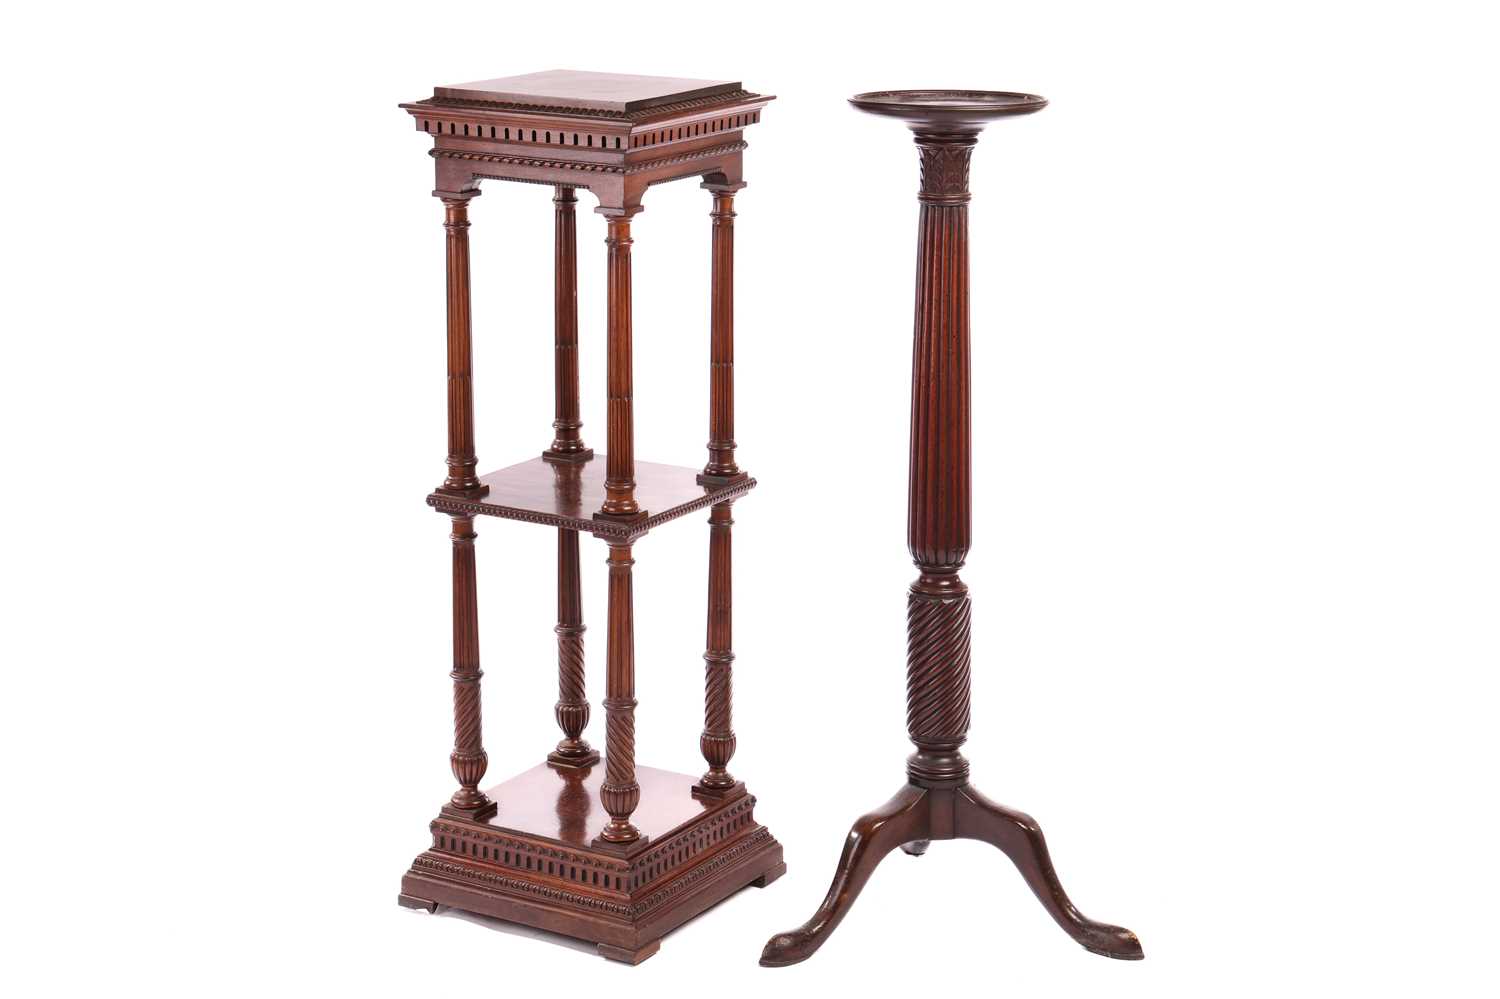 An Edwardian mahogany two-tier pedestal of architectural, form with dentil moulding and fluted colum - Image 6 of 6